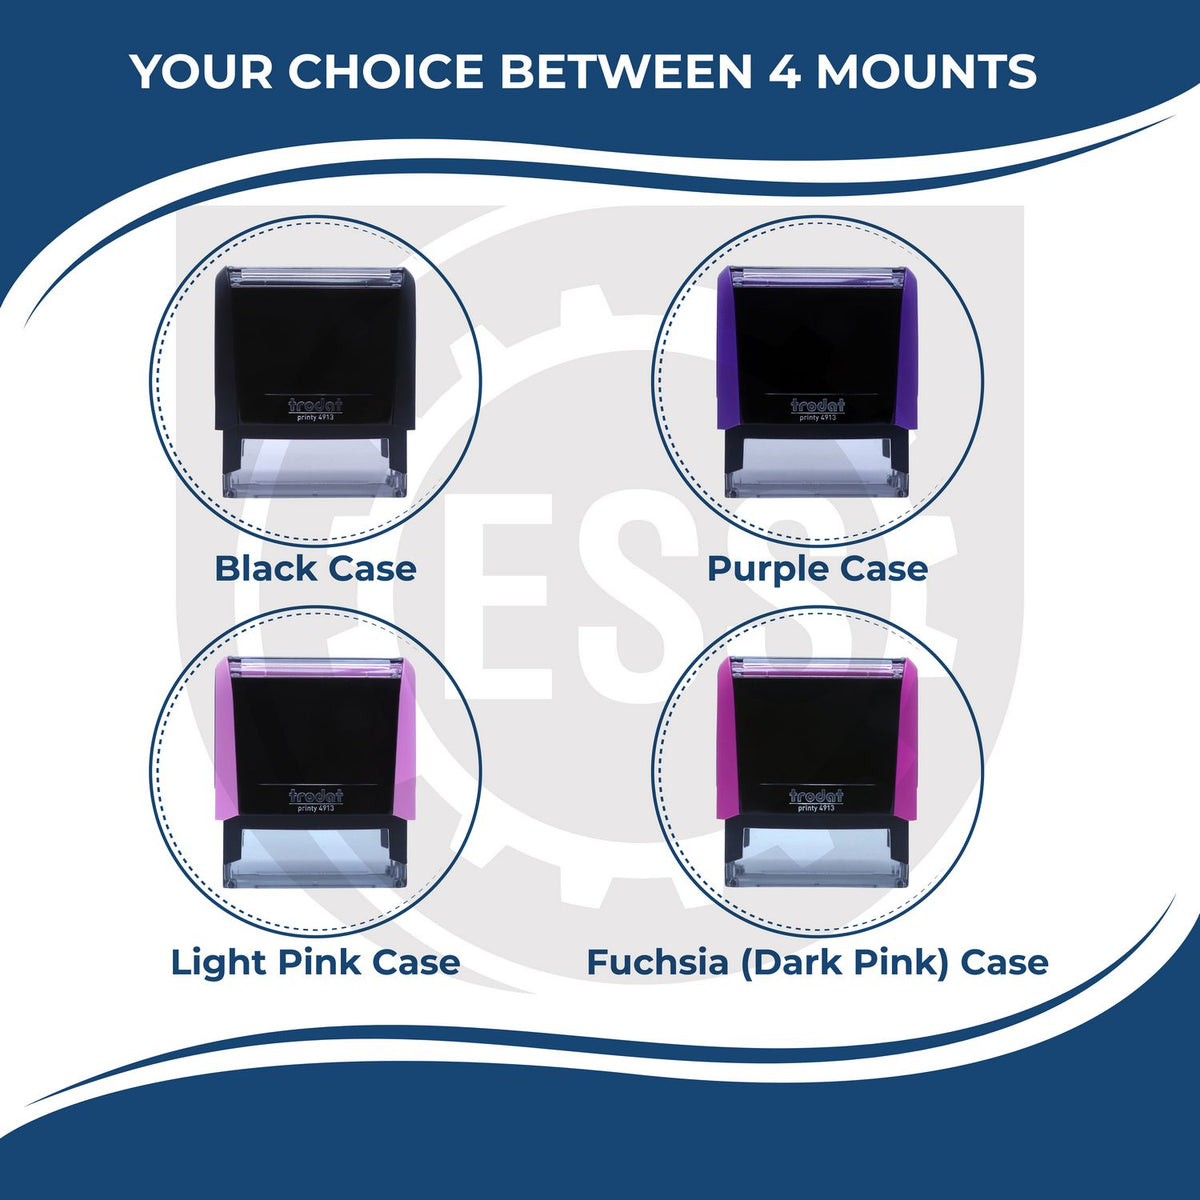 A picture of different colored mounts for the Self-Inking State Seal West Virginia Notary Stamp featurning a Red, Blue or Black Mount